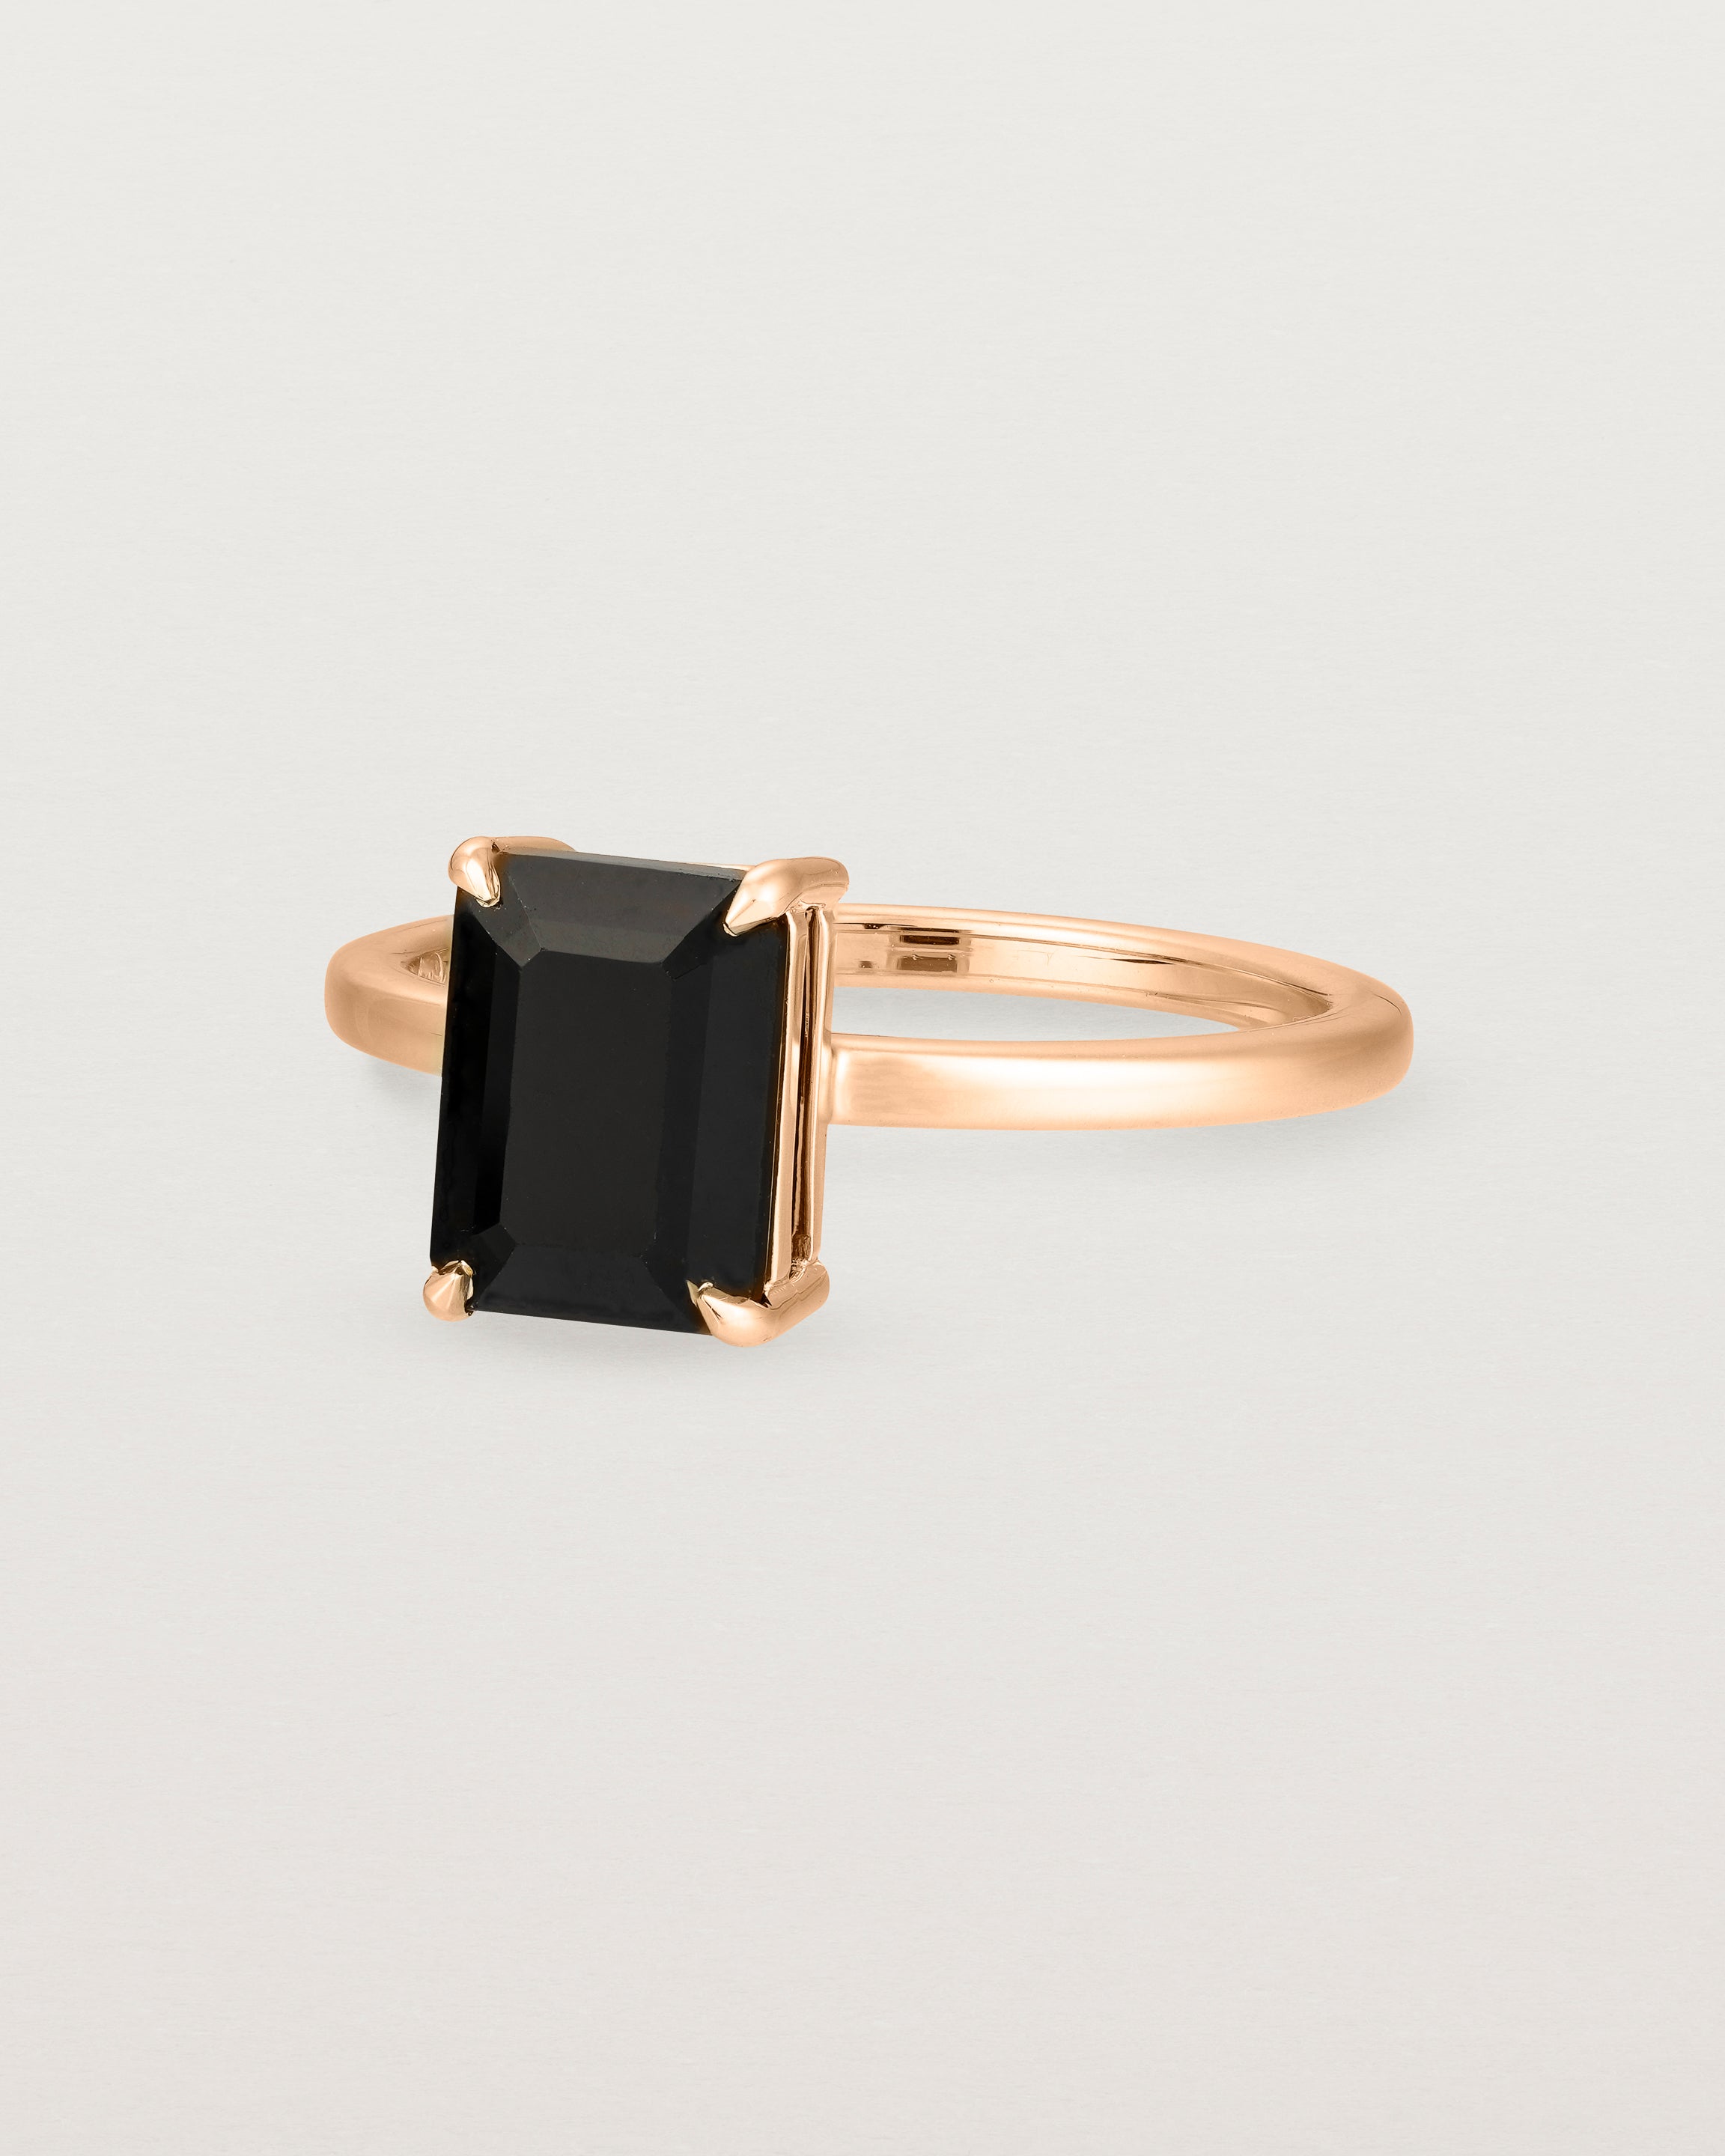 Angled view of the Una Emerald Solitaire | Black Spinel | Rose Gold.